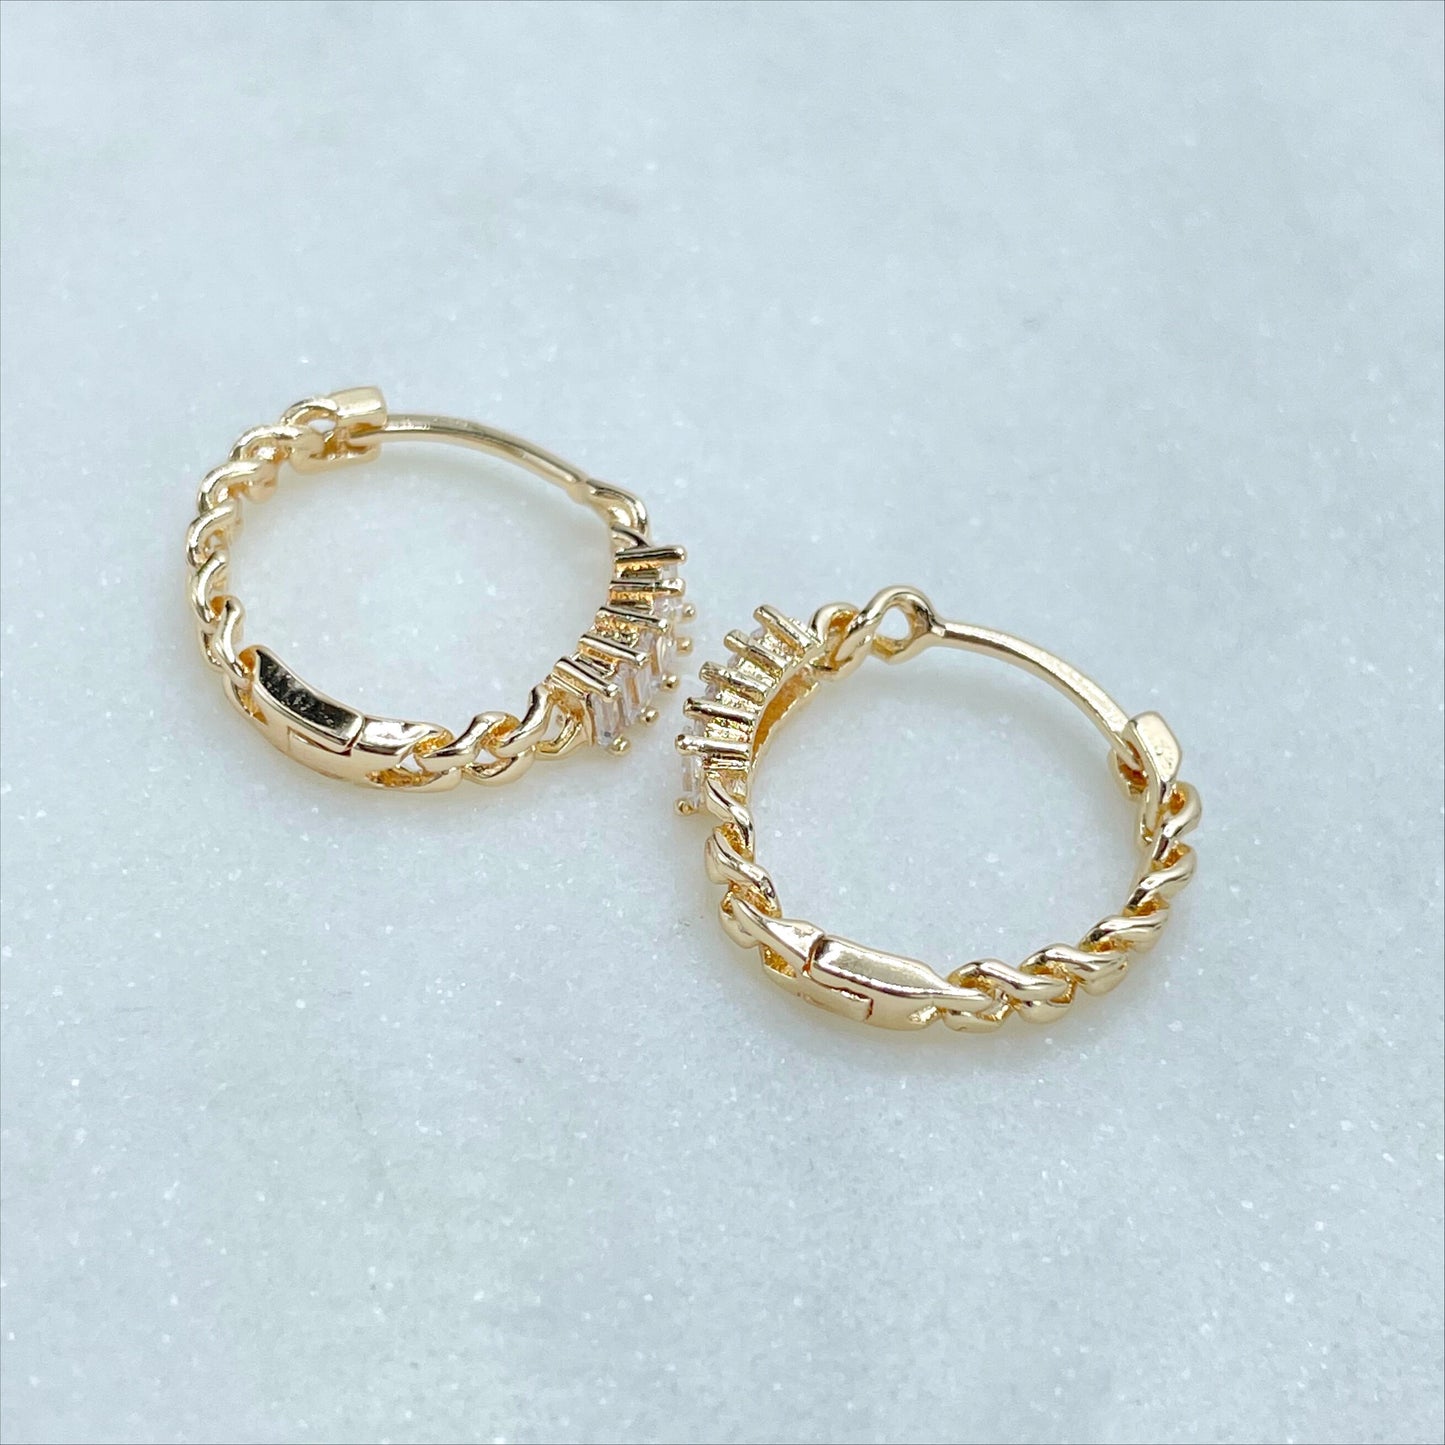 18k Gold Filled 4mm Thickness, with Cubic Zirconia 3mm Curb Link, 20mm, Hoop Earrings Wholesale Jewelry Making Supplies